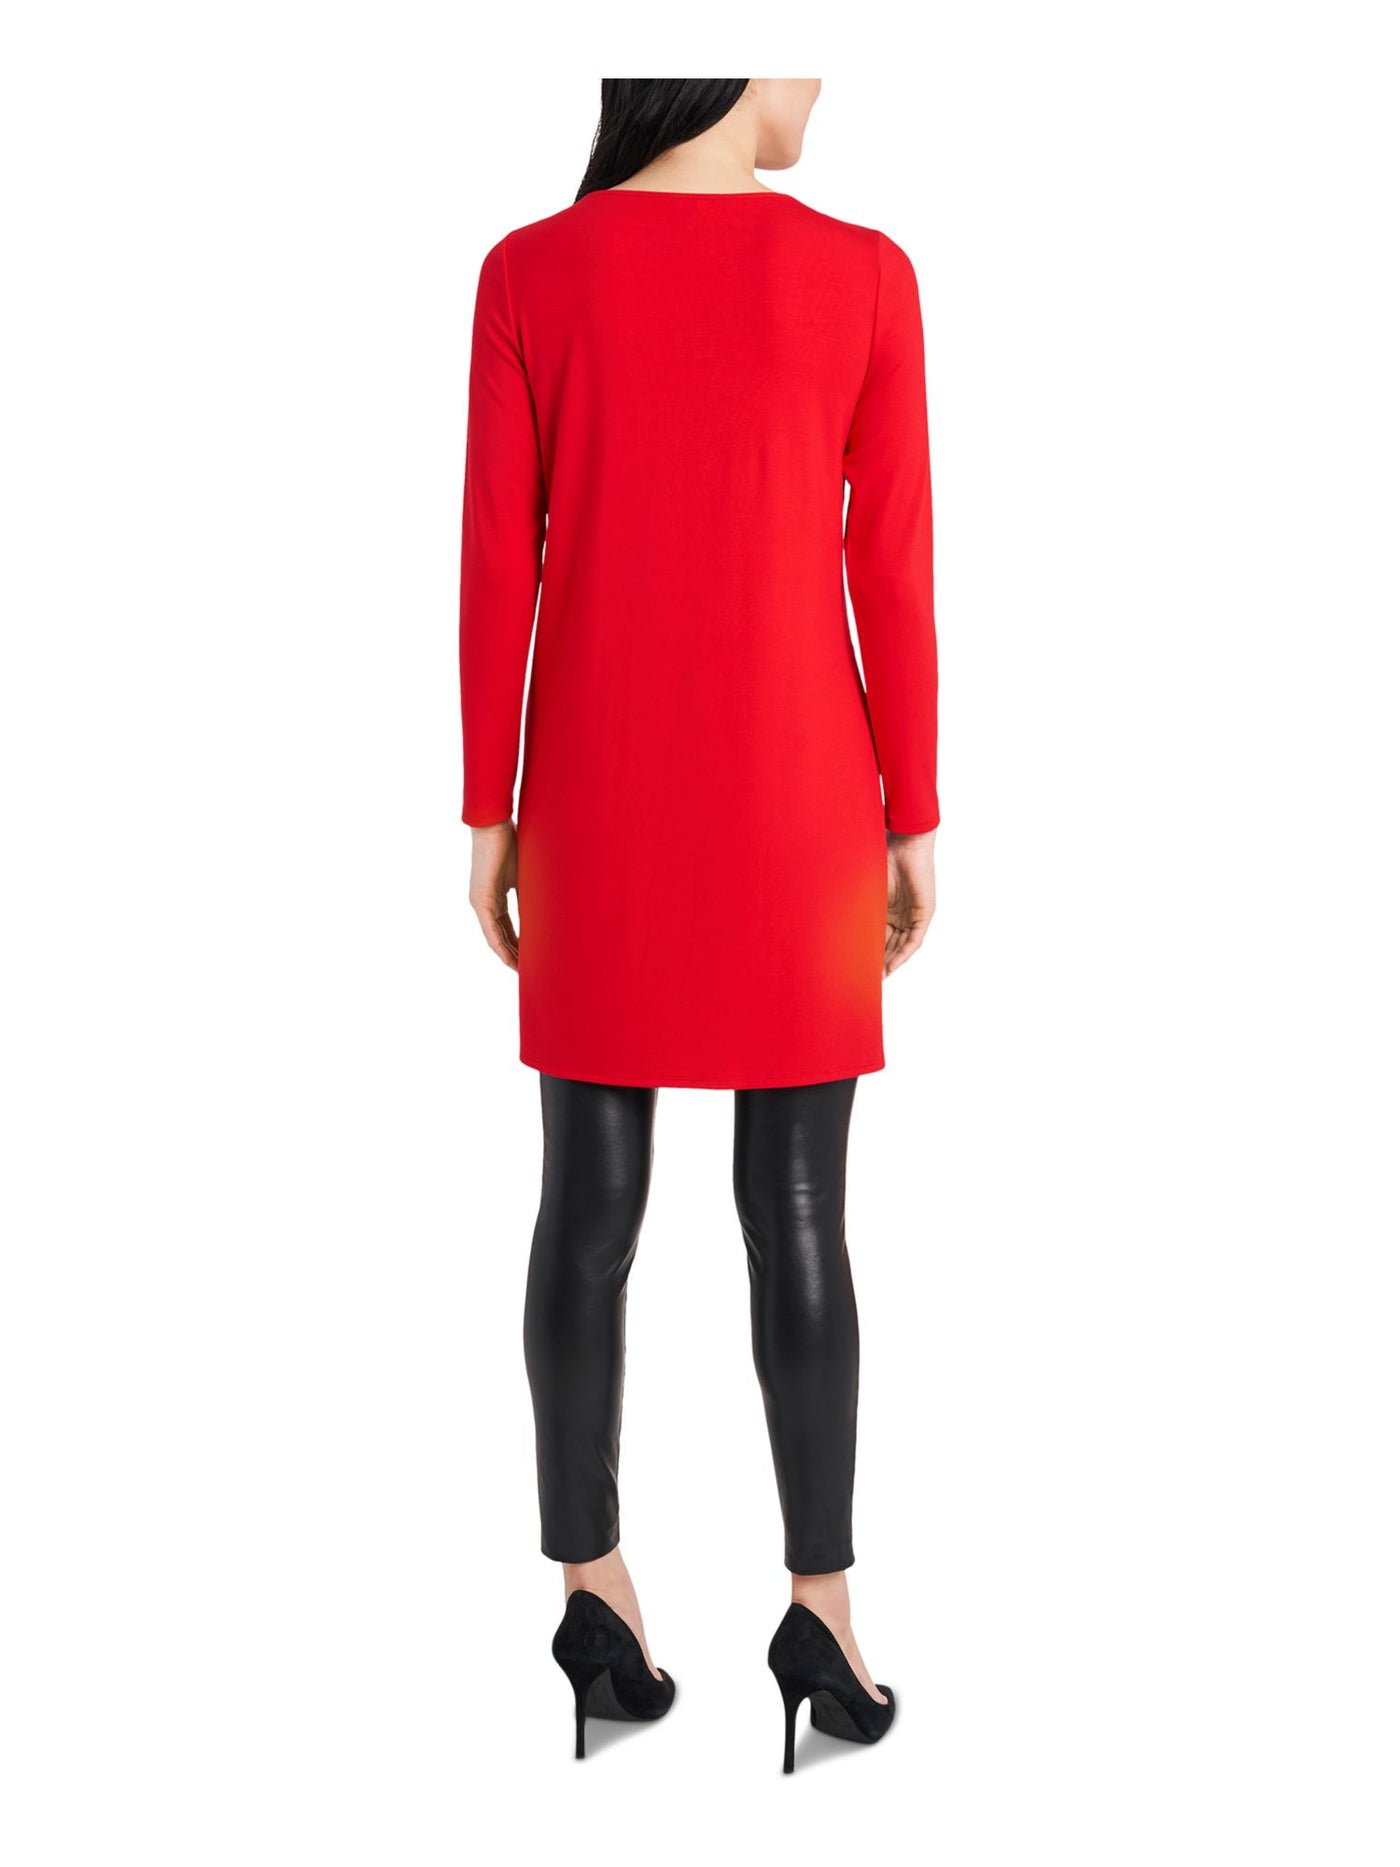 VINCE CAMUTO Womens Red Cut Out Darted Asymmetrical Long Sleeve Round Neck Tunic Top M